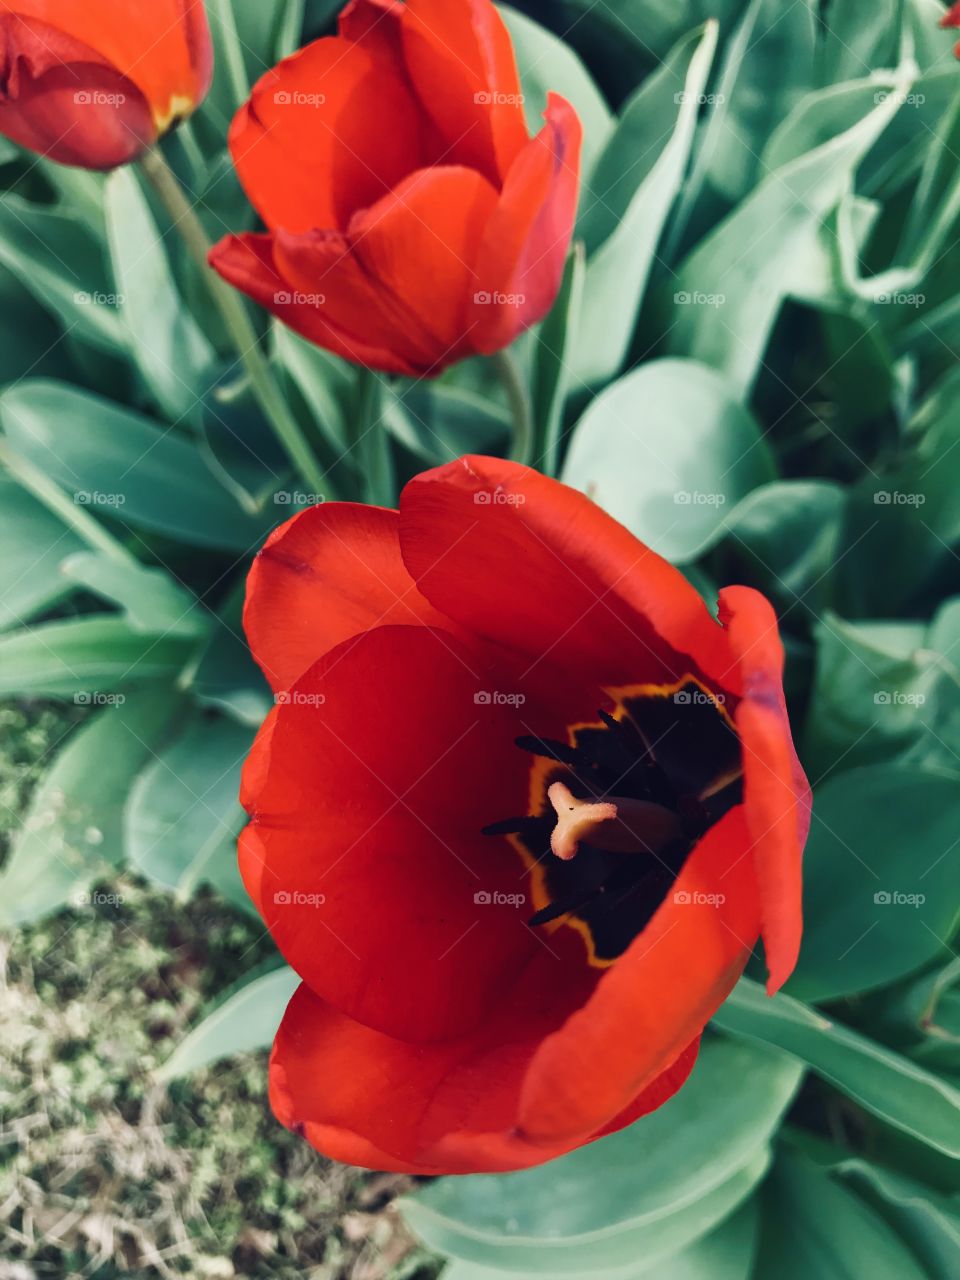 Spring has sprung with this beautiful, vibrant red tulip! 